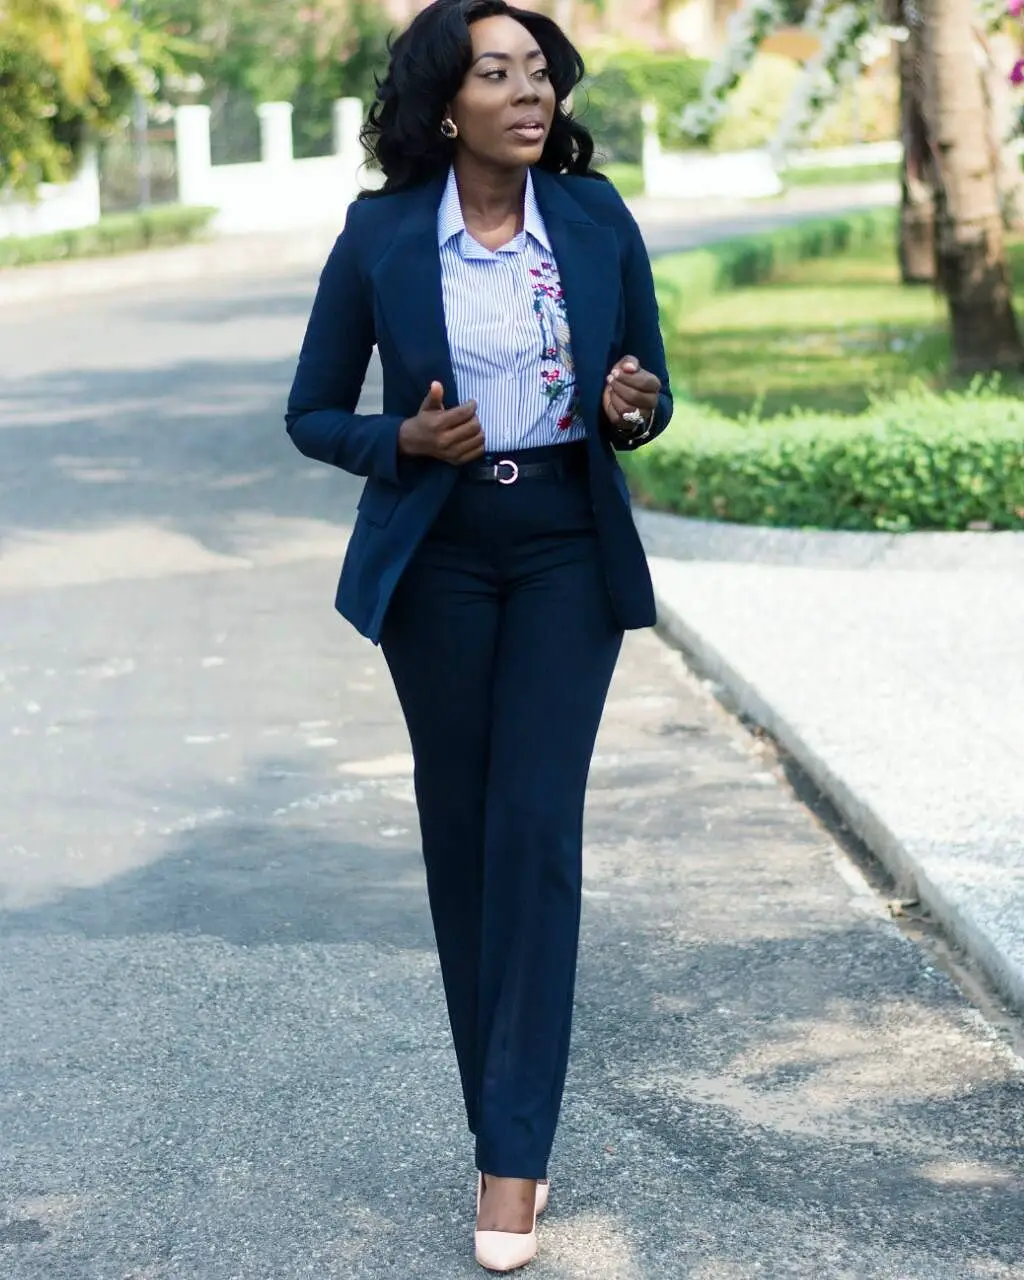 Looking Corporately Chic To Work Just got Fashionable.